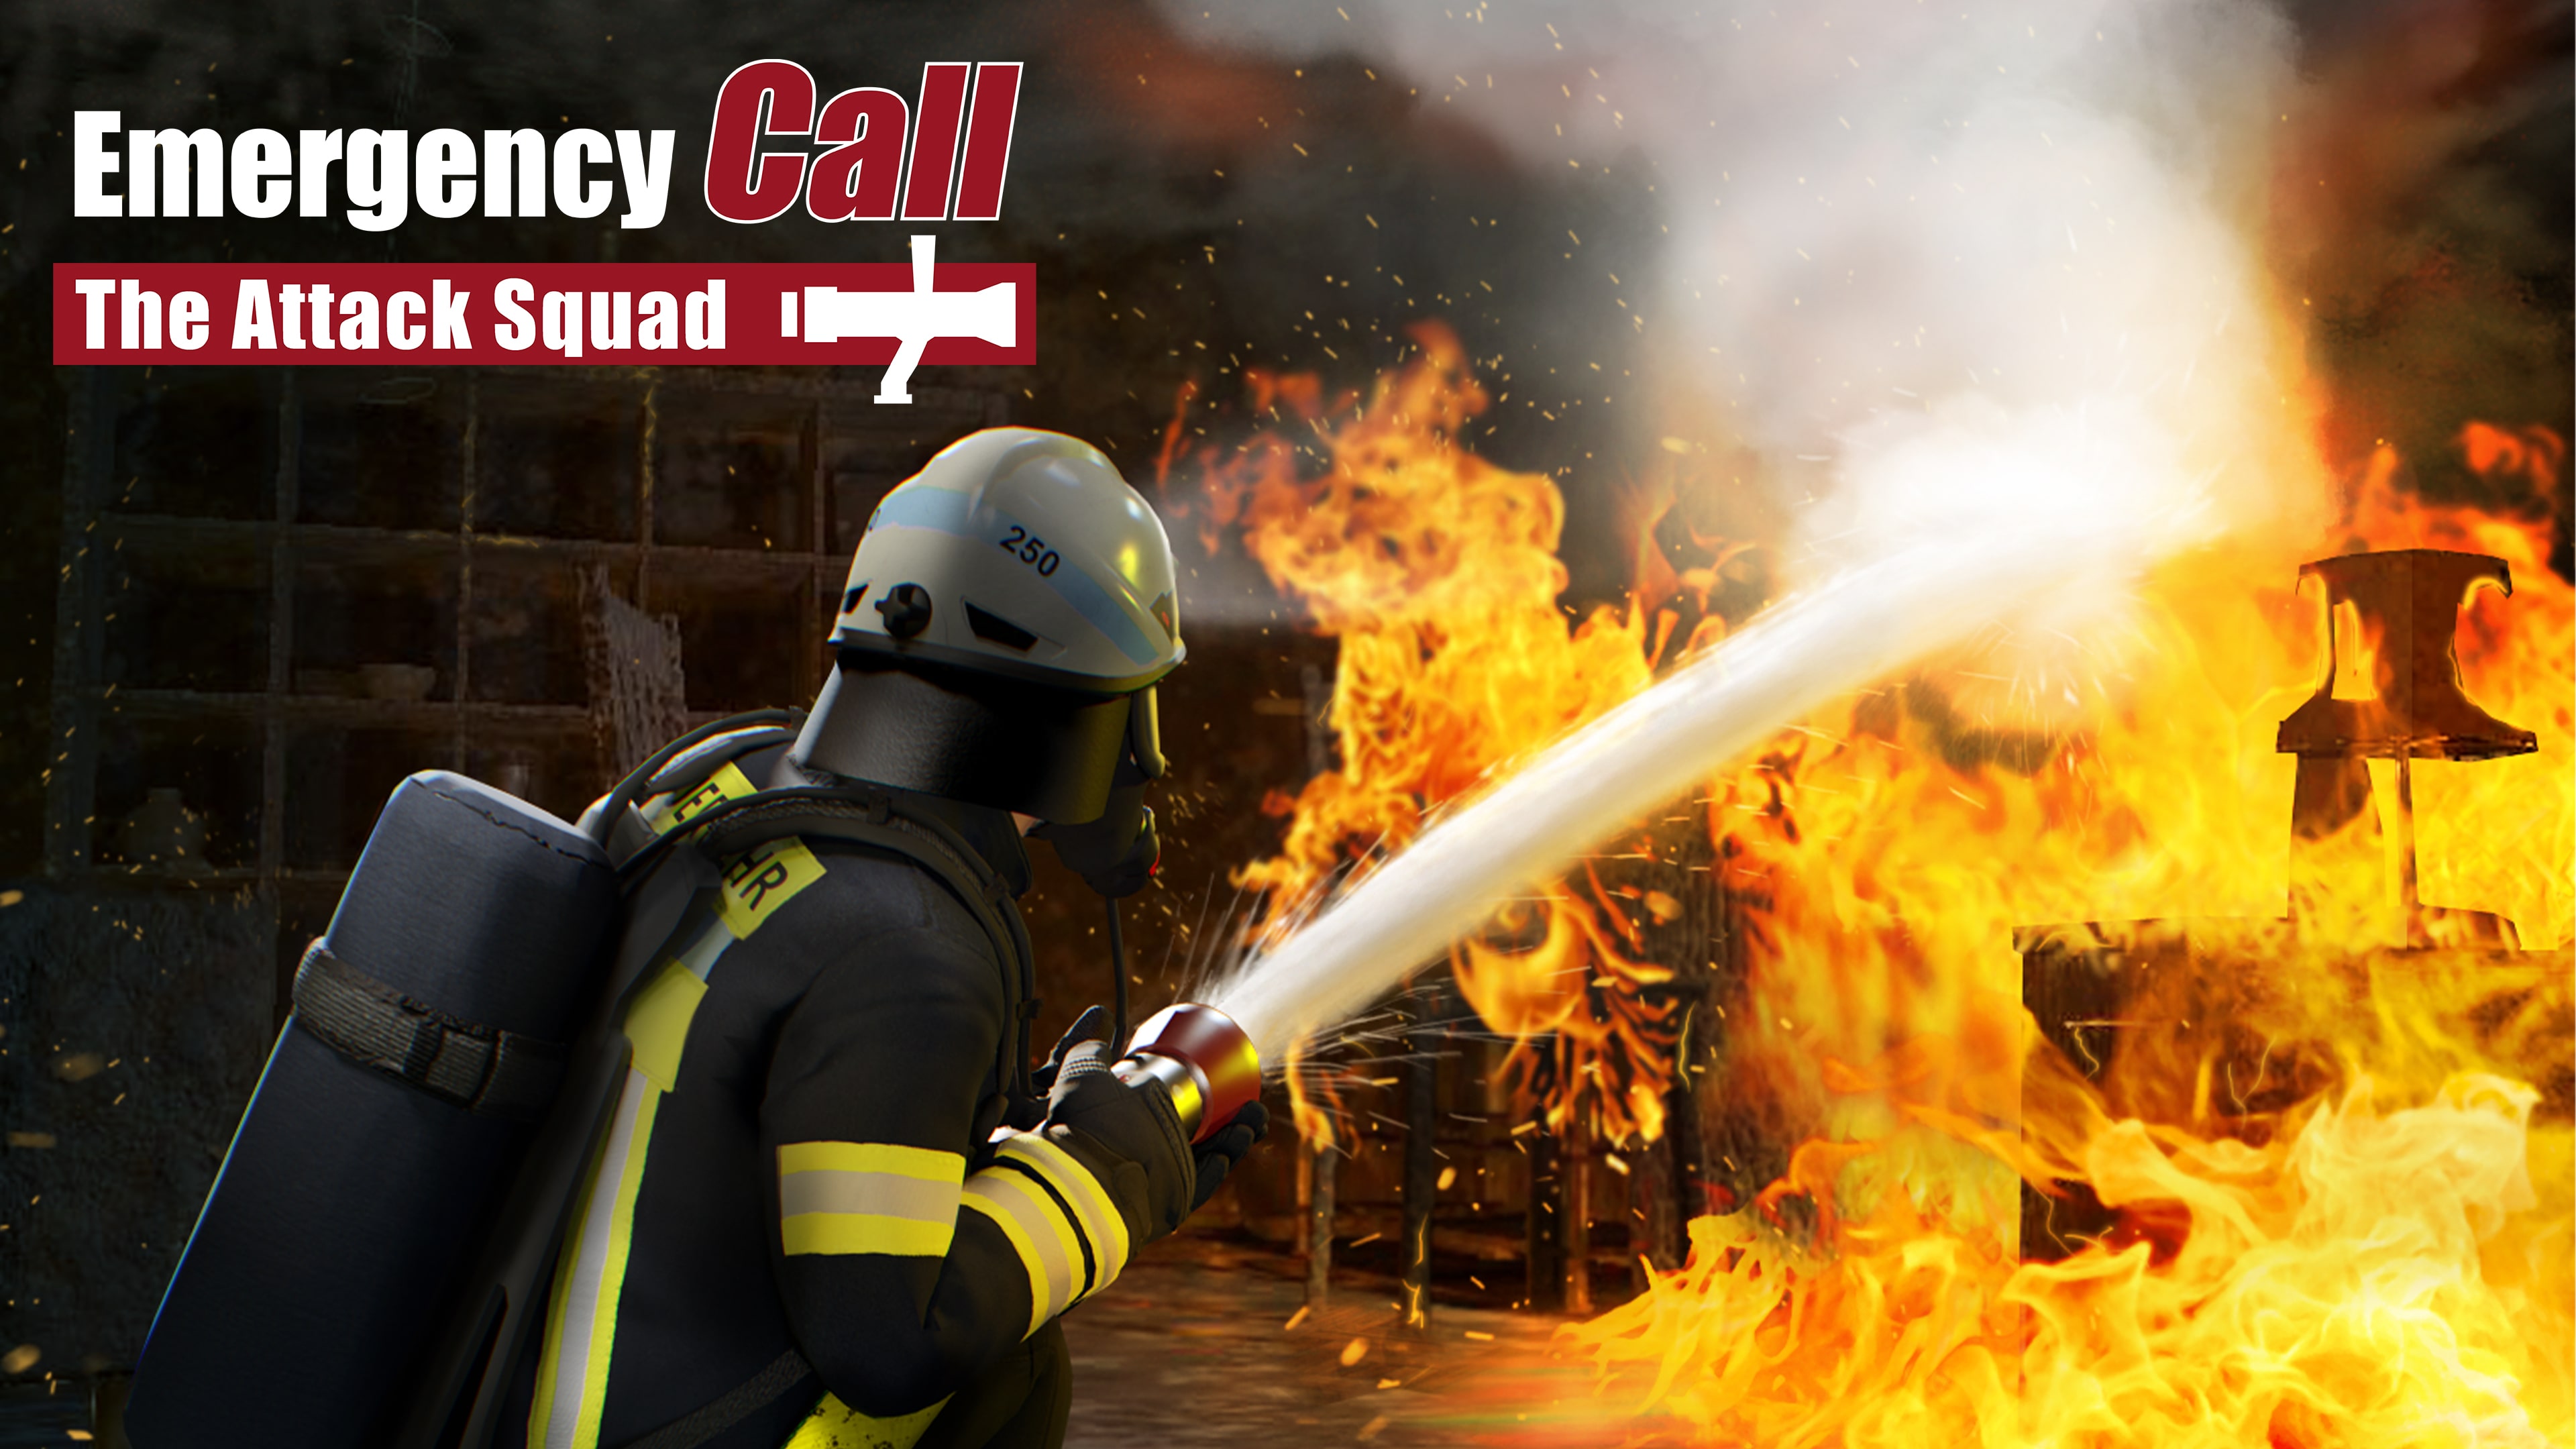 Emergency Call - The Attack Squad (English)